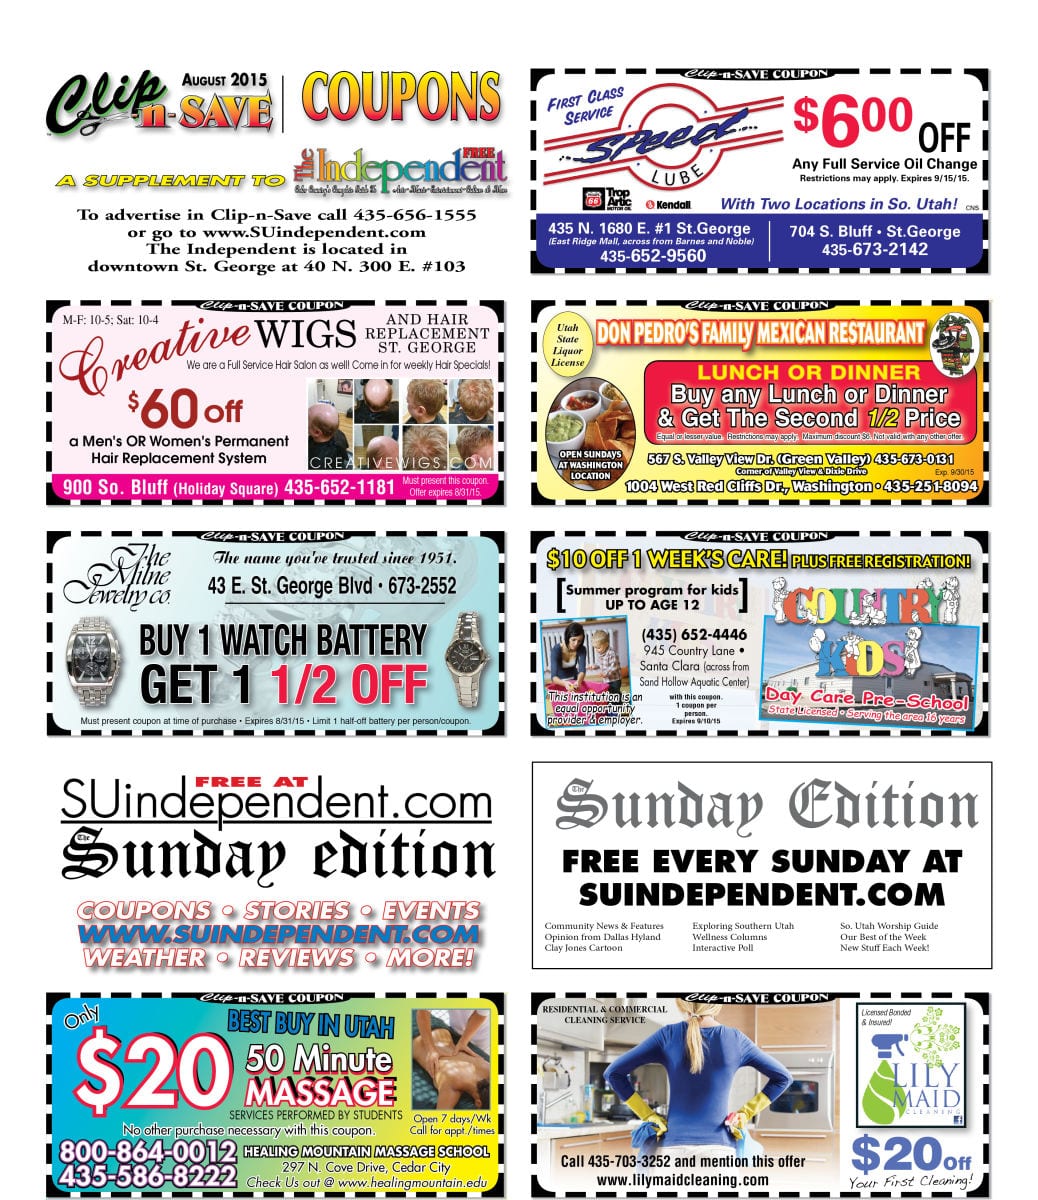 Clip-n-Save August 2015 Coupon Savings Book1038 x 1200